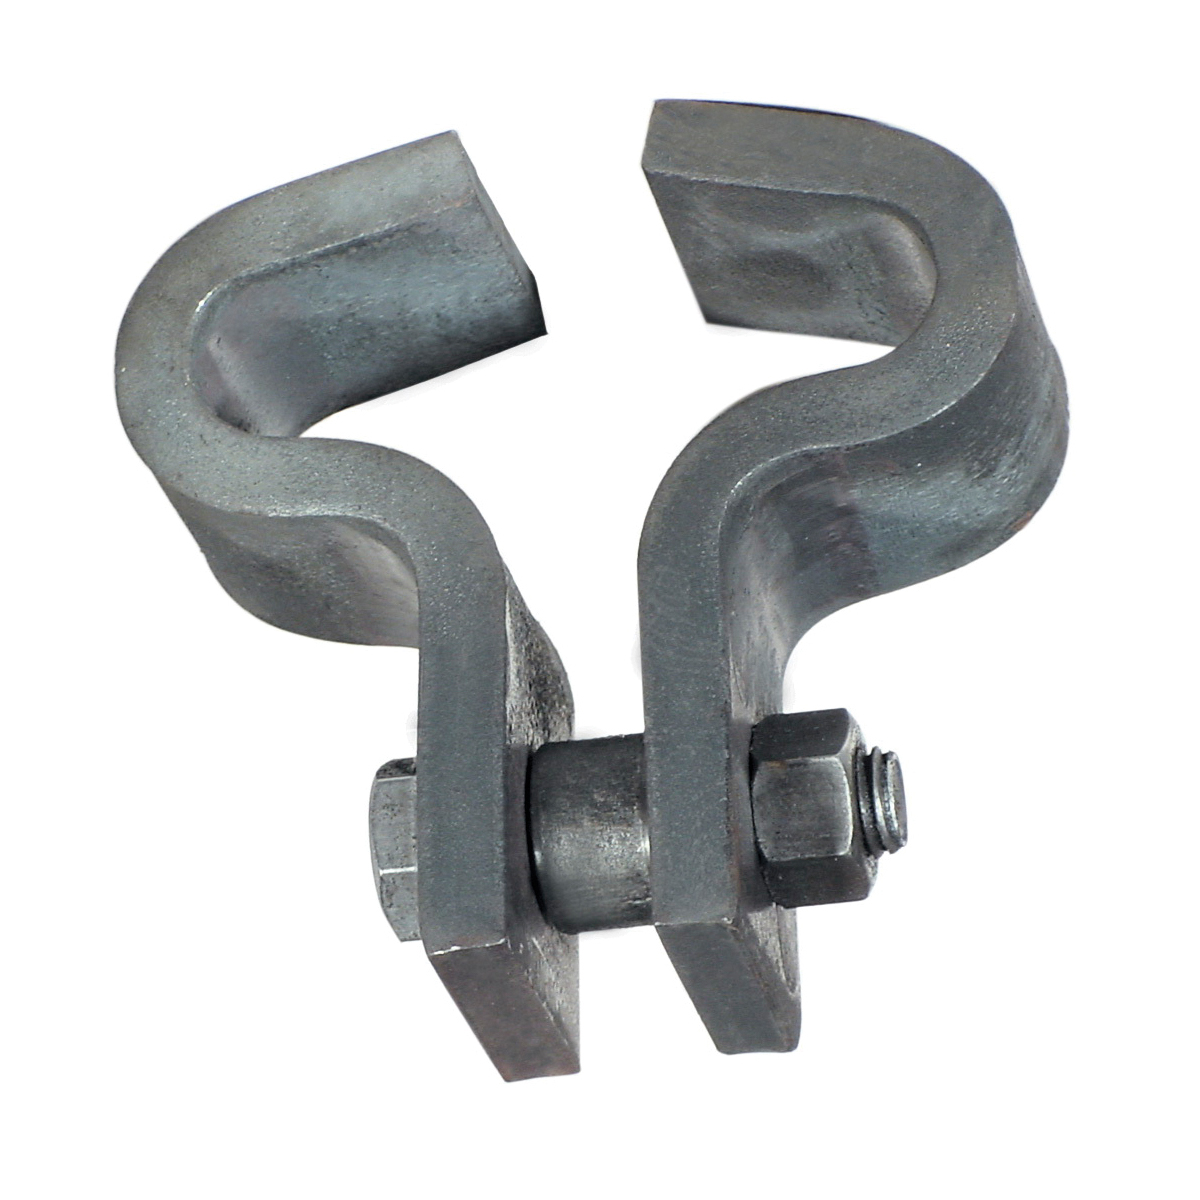 Anvil® 0500315130 FIG 134 Heavy Duty Beam Clamp, 6 in Rod, 3/4 in THK Flange, 3000 lb Load, Carbon Steel, Galvanized